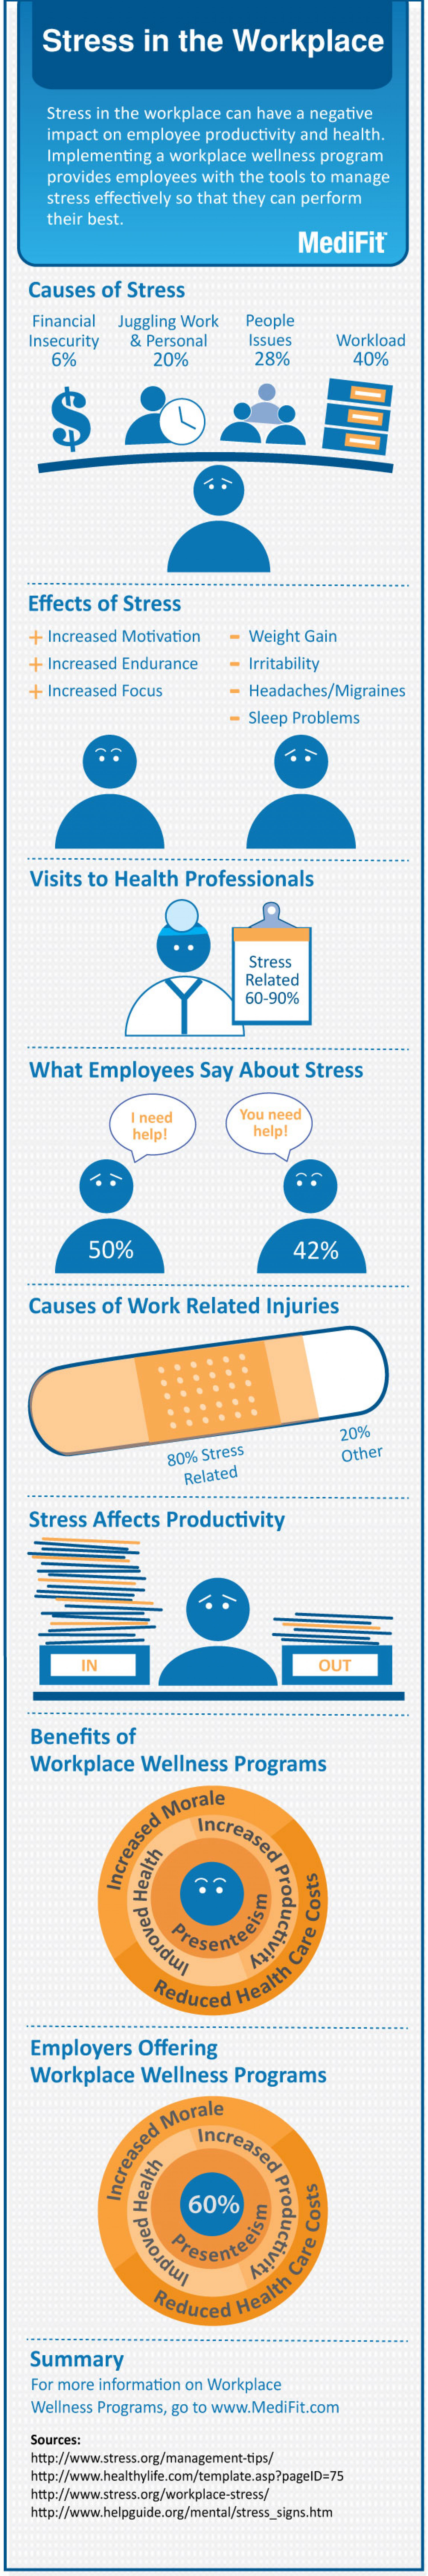 Stress In the Workplace Infographic